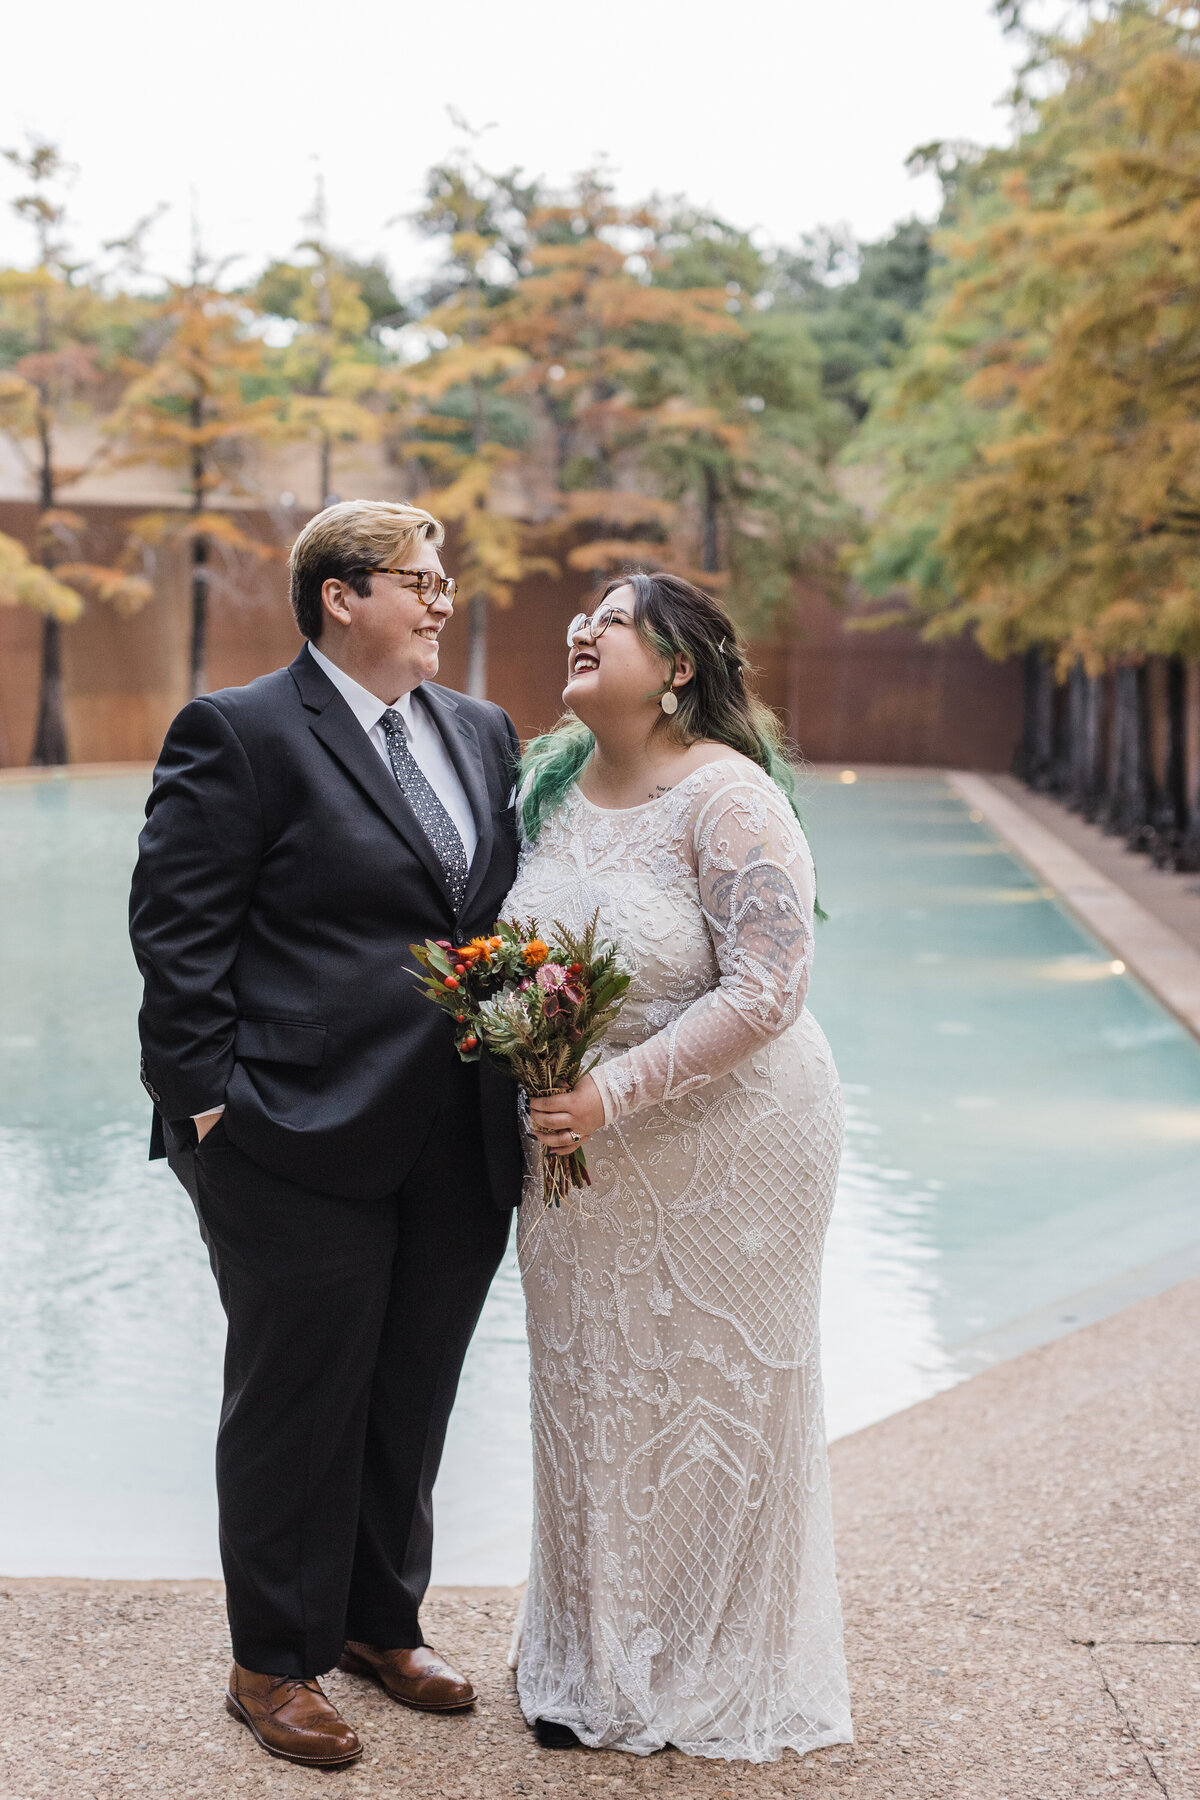 A bride and a marrier posing together after their elopement ceremony at the Fort Worth Water Gardens in Fort Worth, Texas. The bride is on the right and is wearing an intricate, long sleeve, white dress and is holding a bouquet. The marrier is on the left and is wearing a dark suit with a tie.